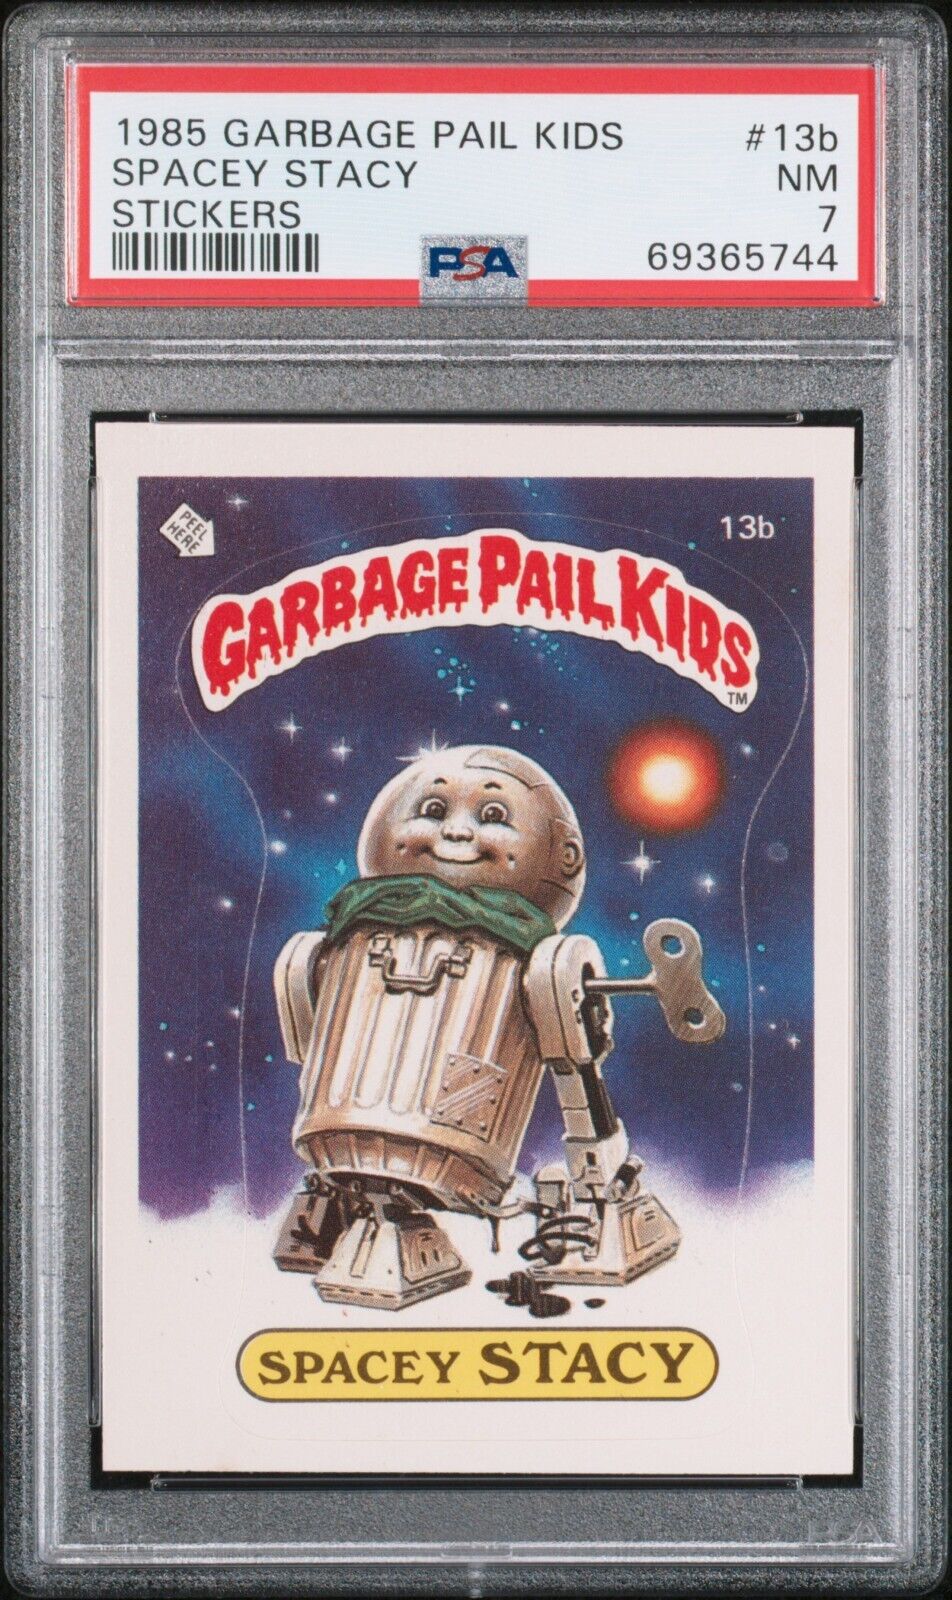 1985 Topps OS1 Garbage Pail Kids Series 1 SPACEY STACY GLOSSY 13b Card PSA 7 NM